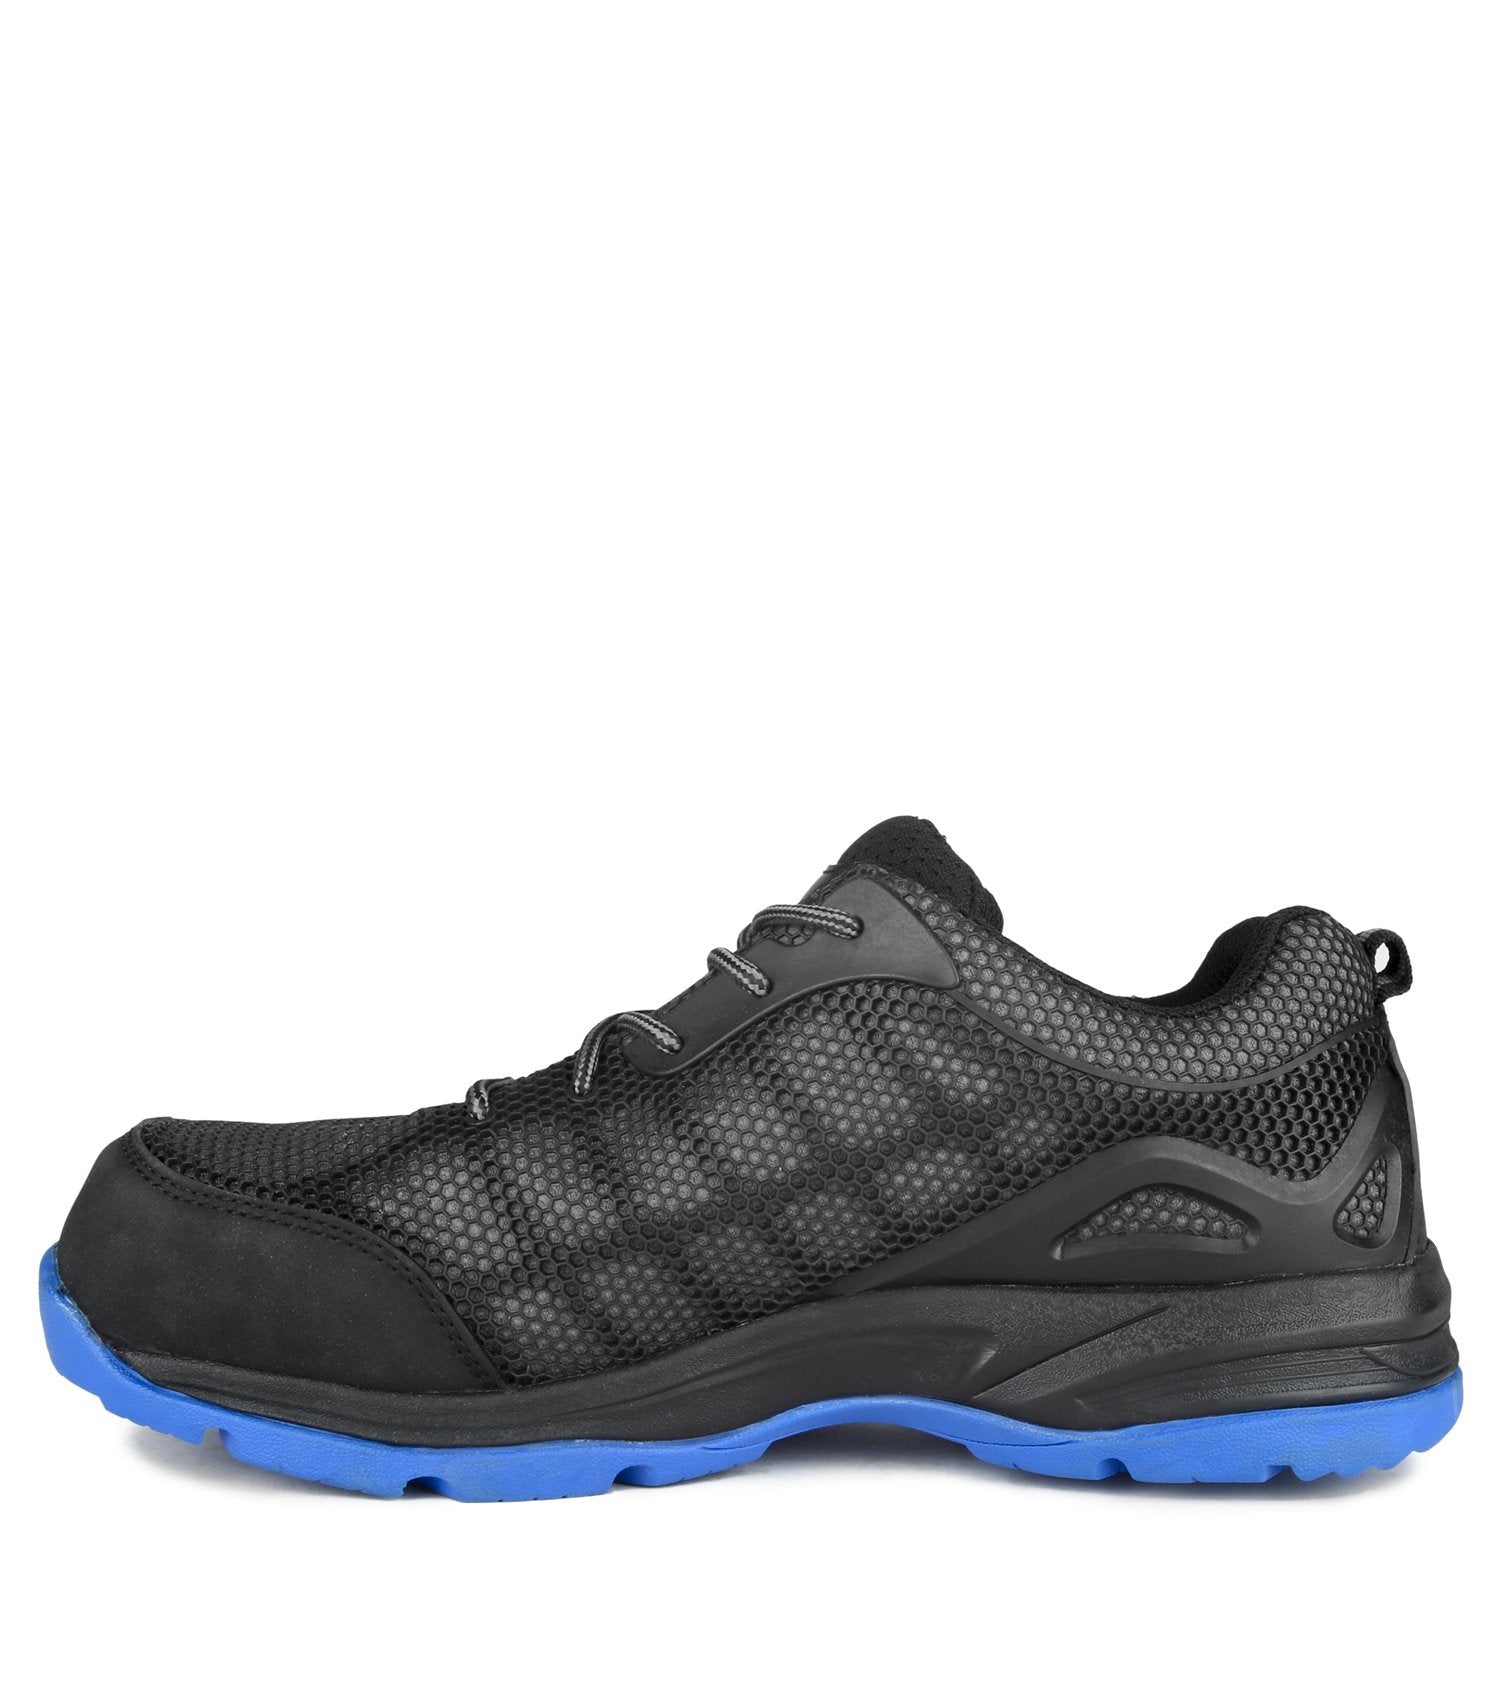 Acton Profusion Indoor Safety Work Shoes | Blue Tinted | Sizes 7-15 Work Boots - Cleanflow